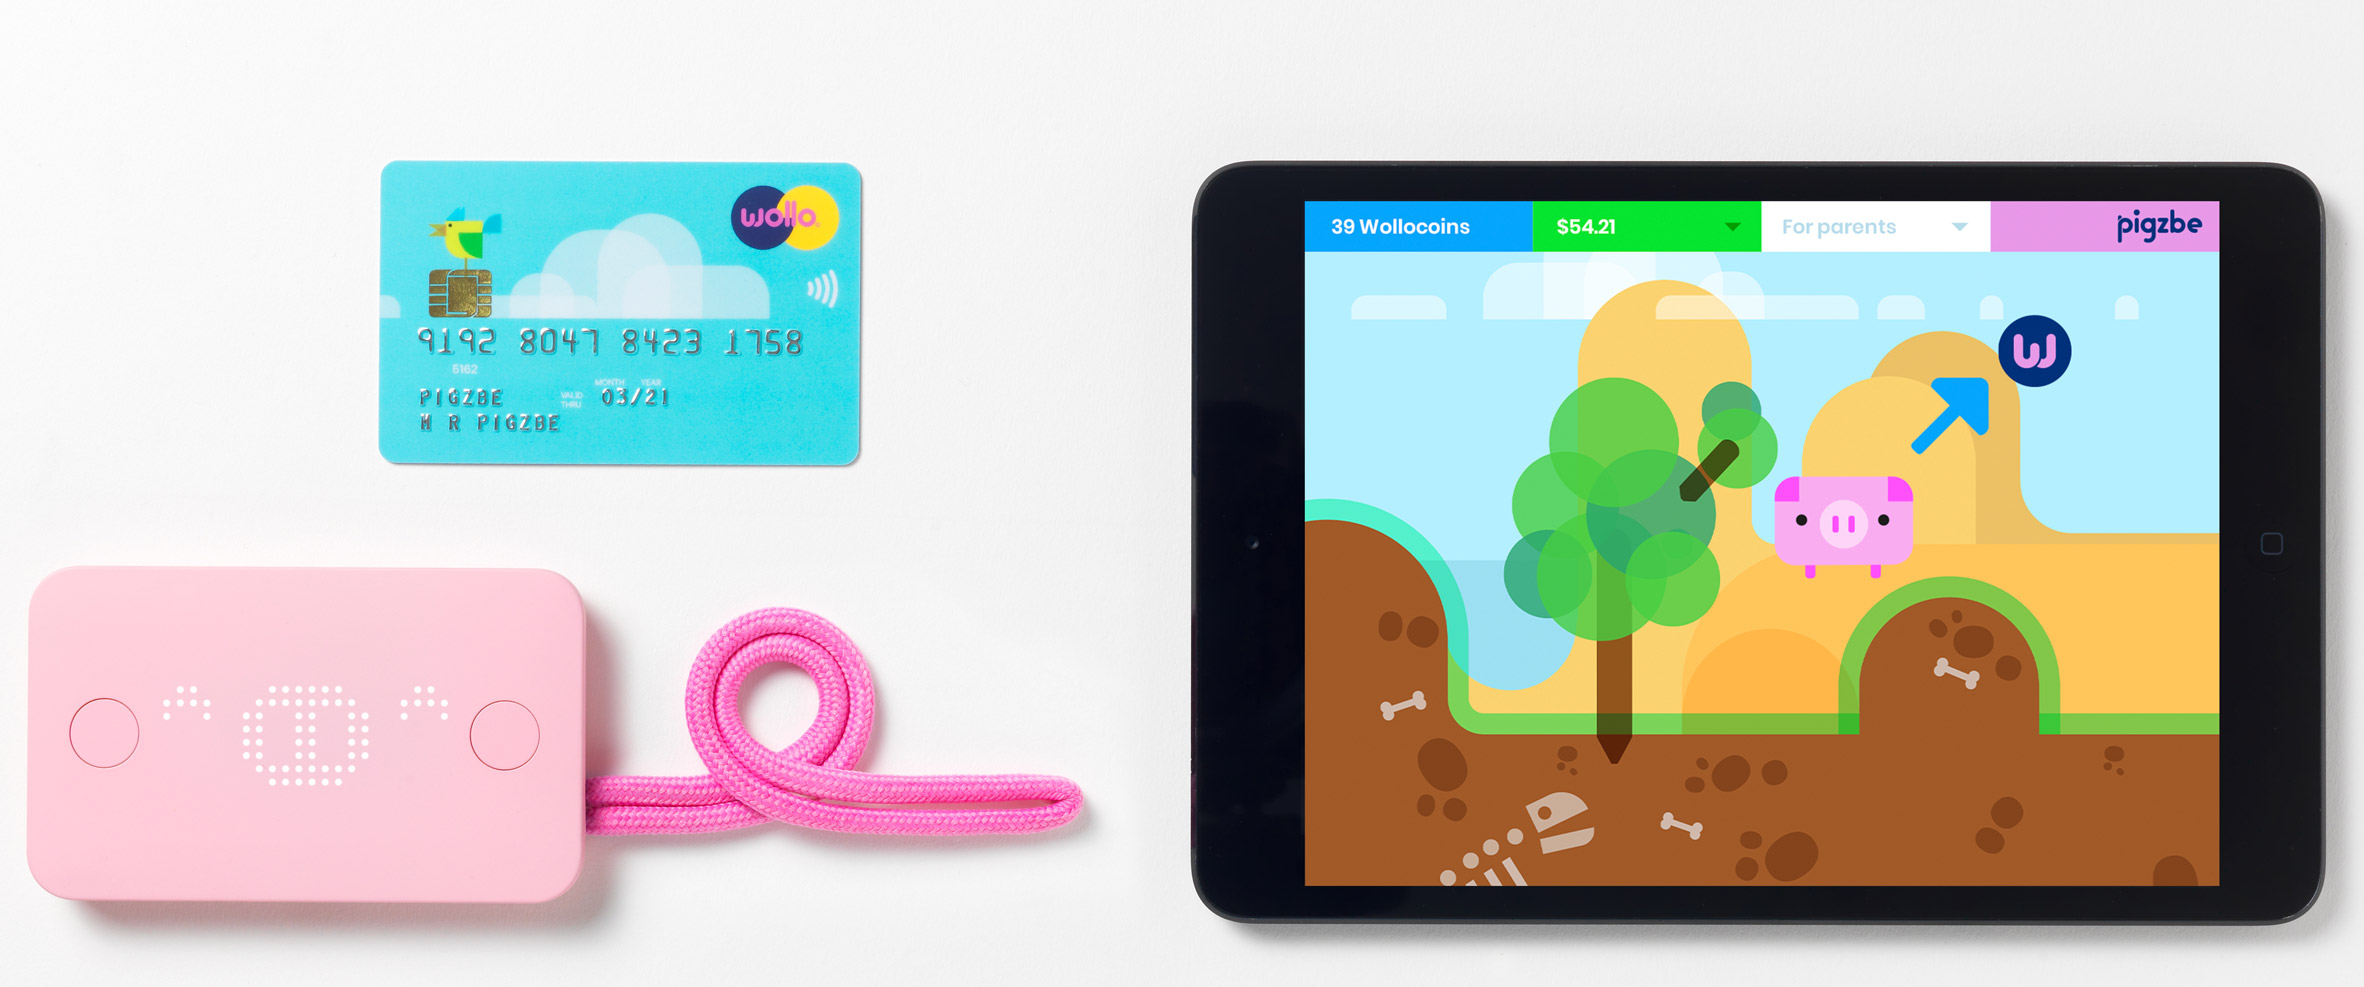 Pigzbe app aims to teach children about cryptocurrency